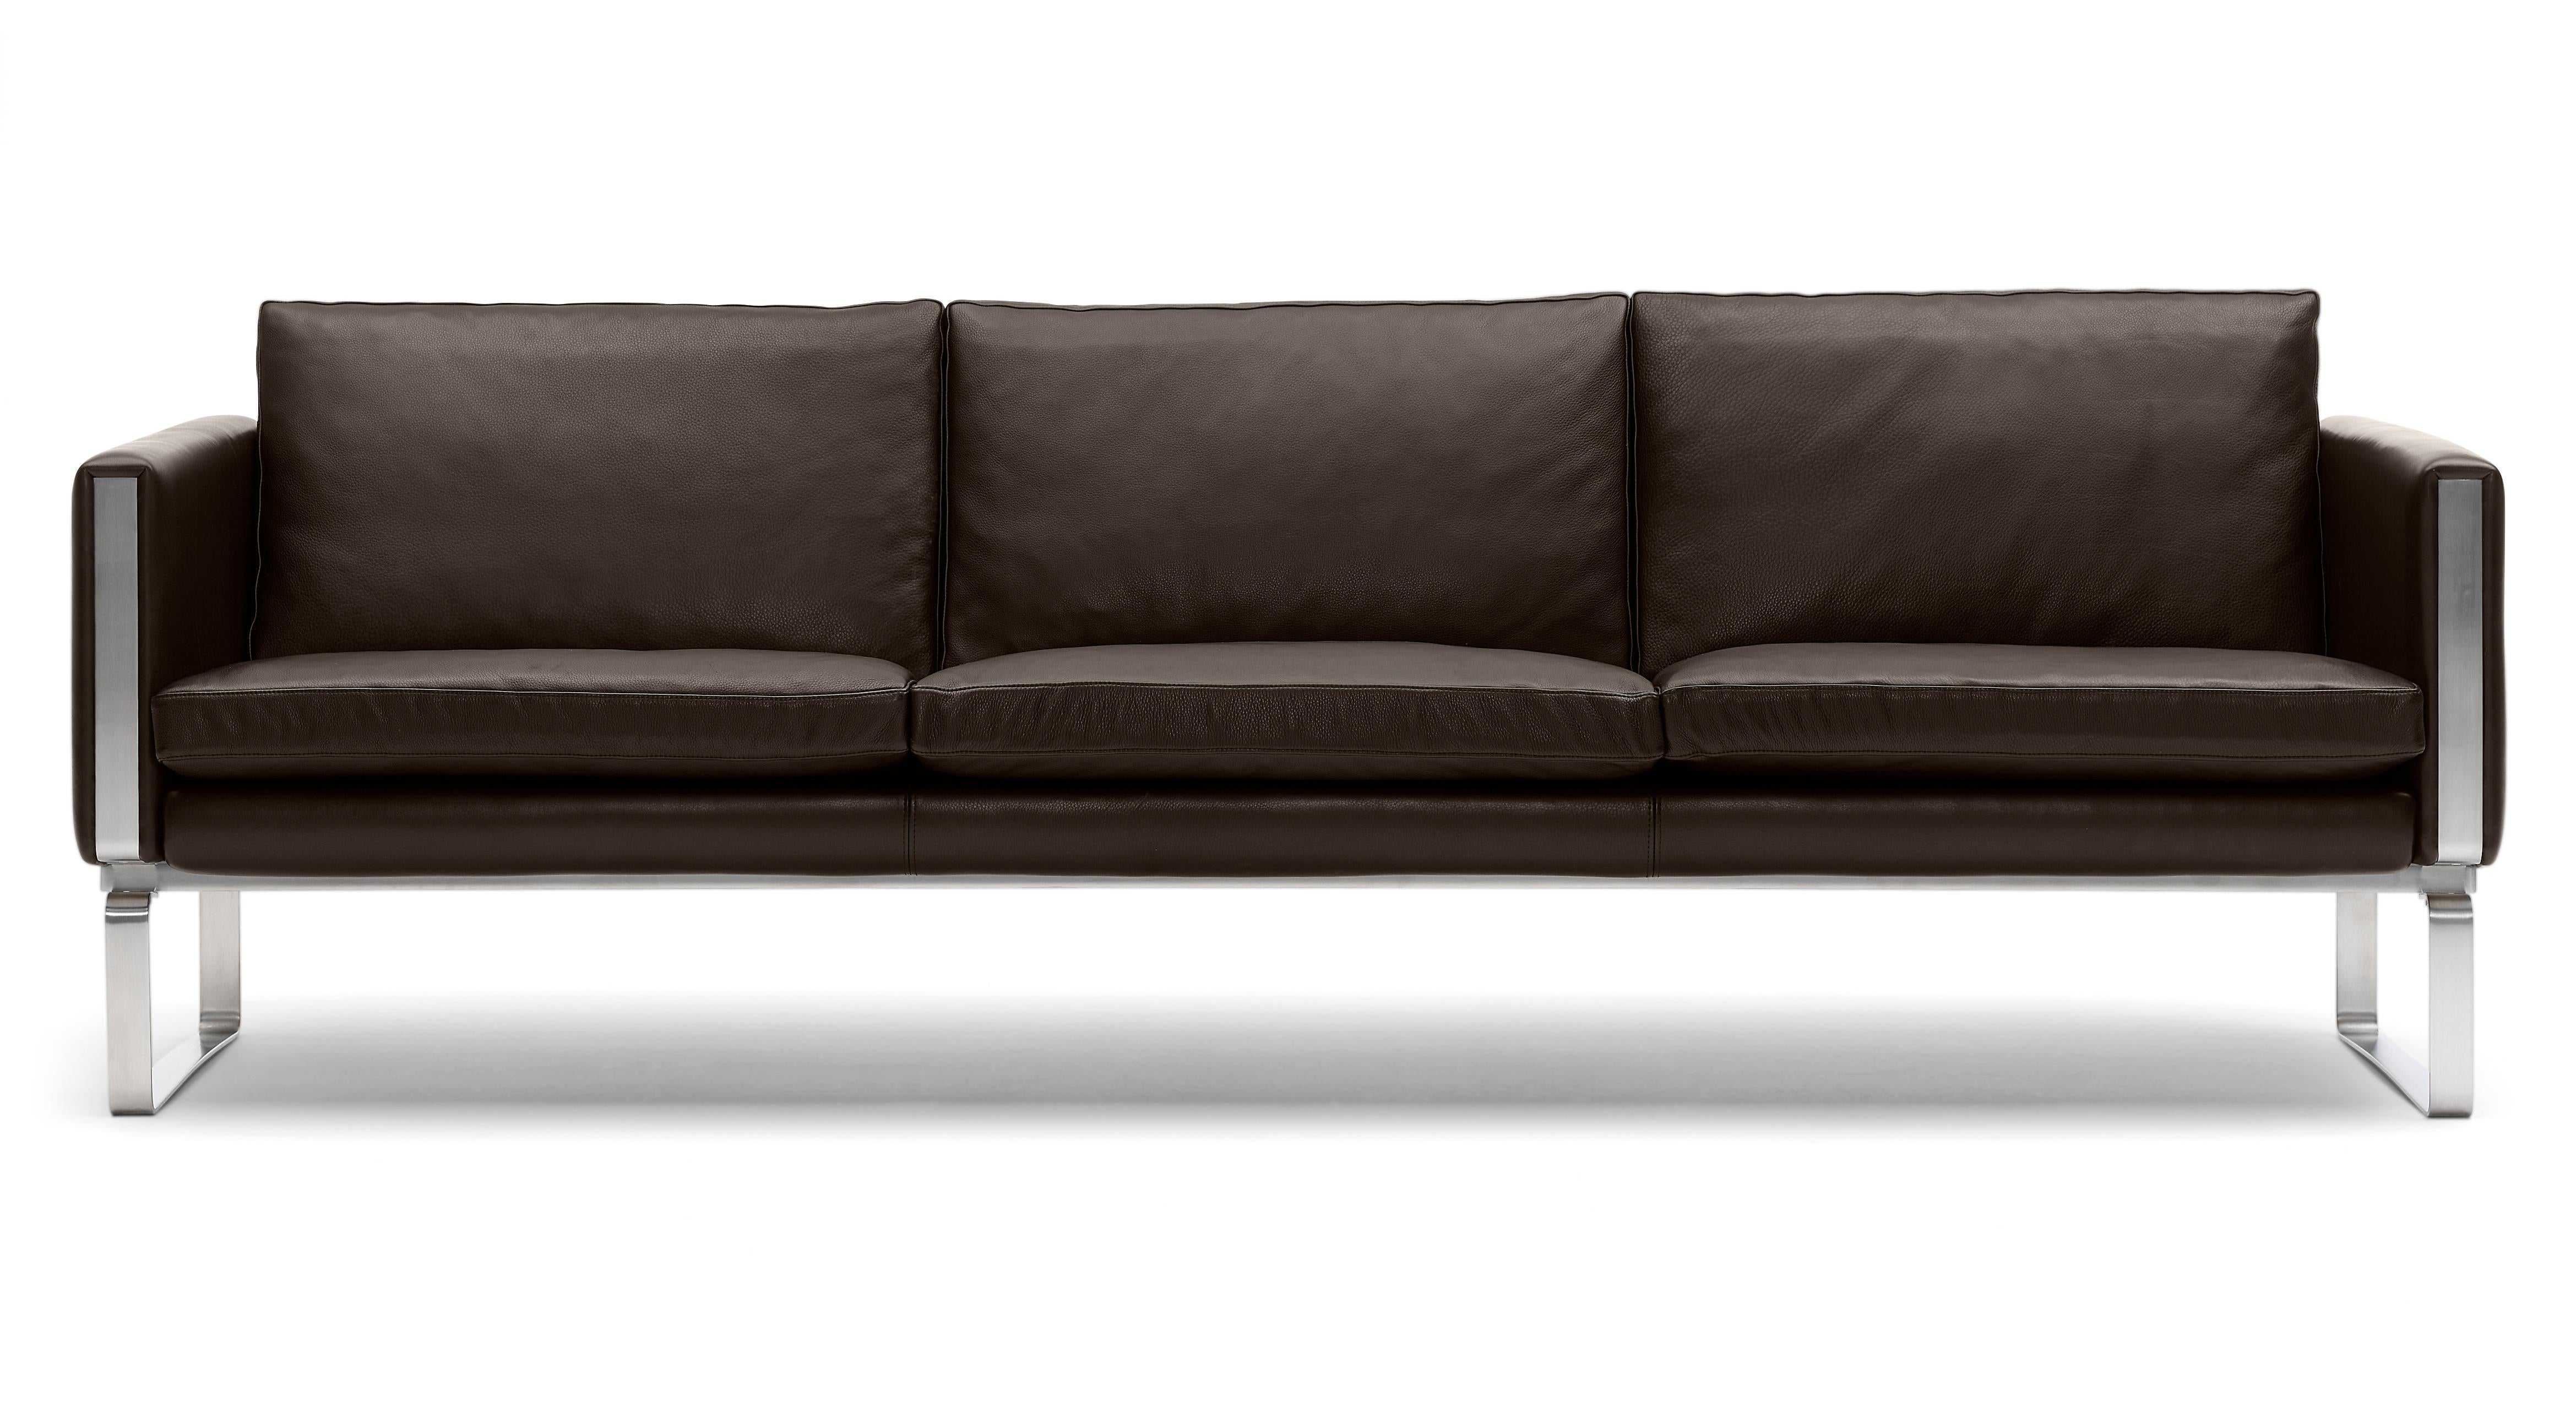 Brown (Thor 306) CH104 4-Seat Sofa in Stainless Steel Frame with Leather Seat by Hans J. Wegner